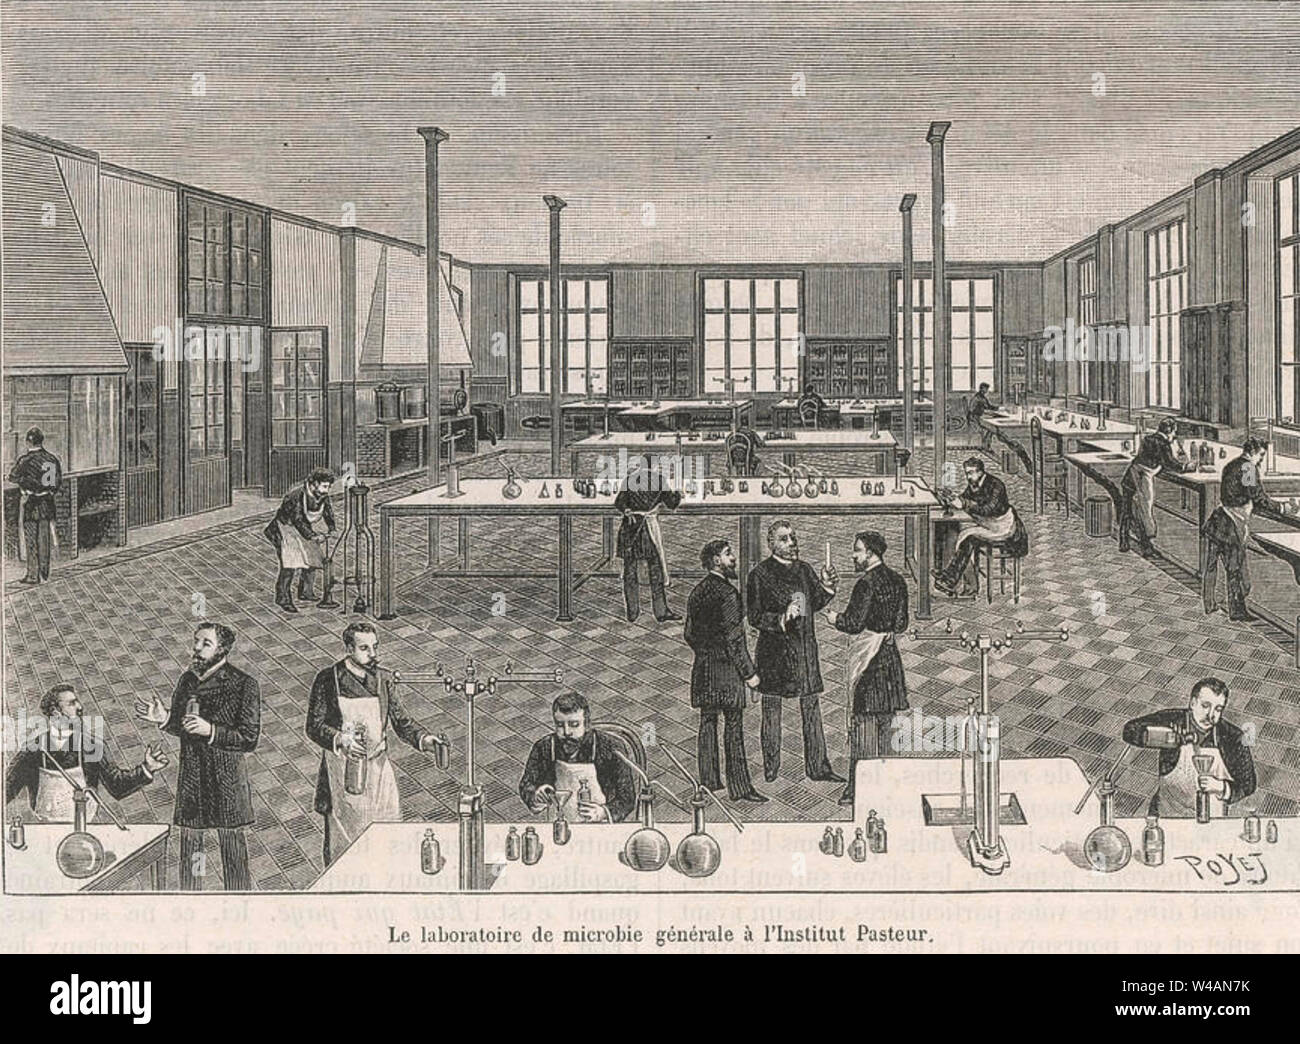 LOUIS PASTEUR (1822-1895) French biologist and chemist. The Pasteur Institute in Paris shortly after opening in 1888. Stock Photo